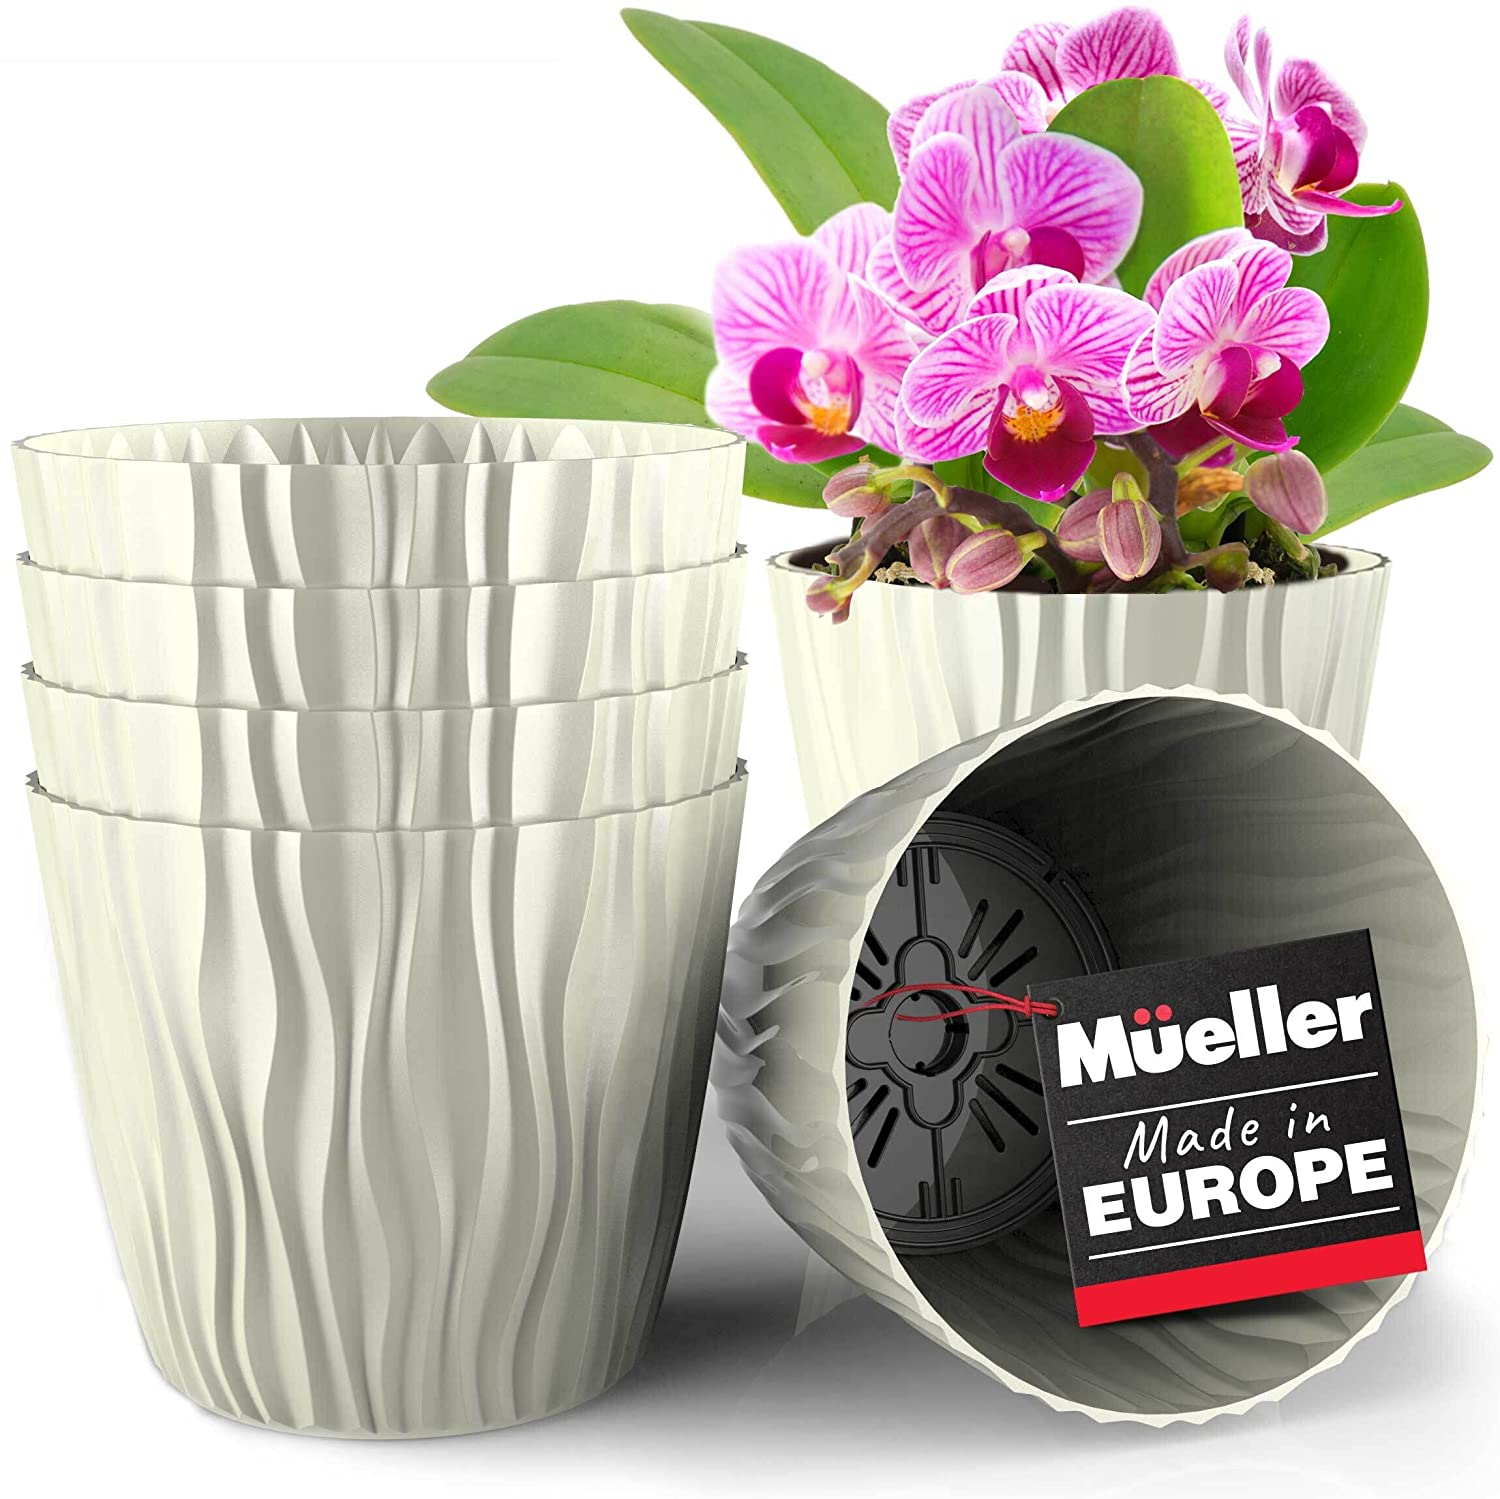 Flowers European Made for All House Plants Herbs Grey 2 x 7.5 and 1 x 9.2 Inch 2 x 6 Indoor and Outdoor Modern Decorative Planter Mueller Austria Plant and Flower Pot 5/1 Set 